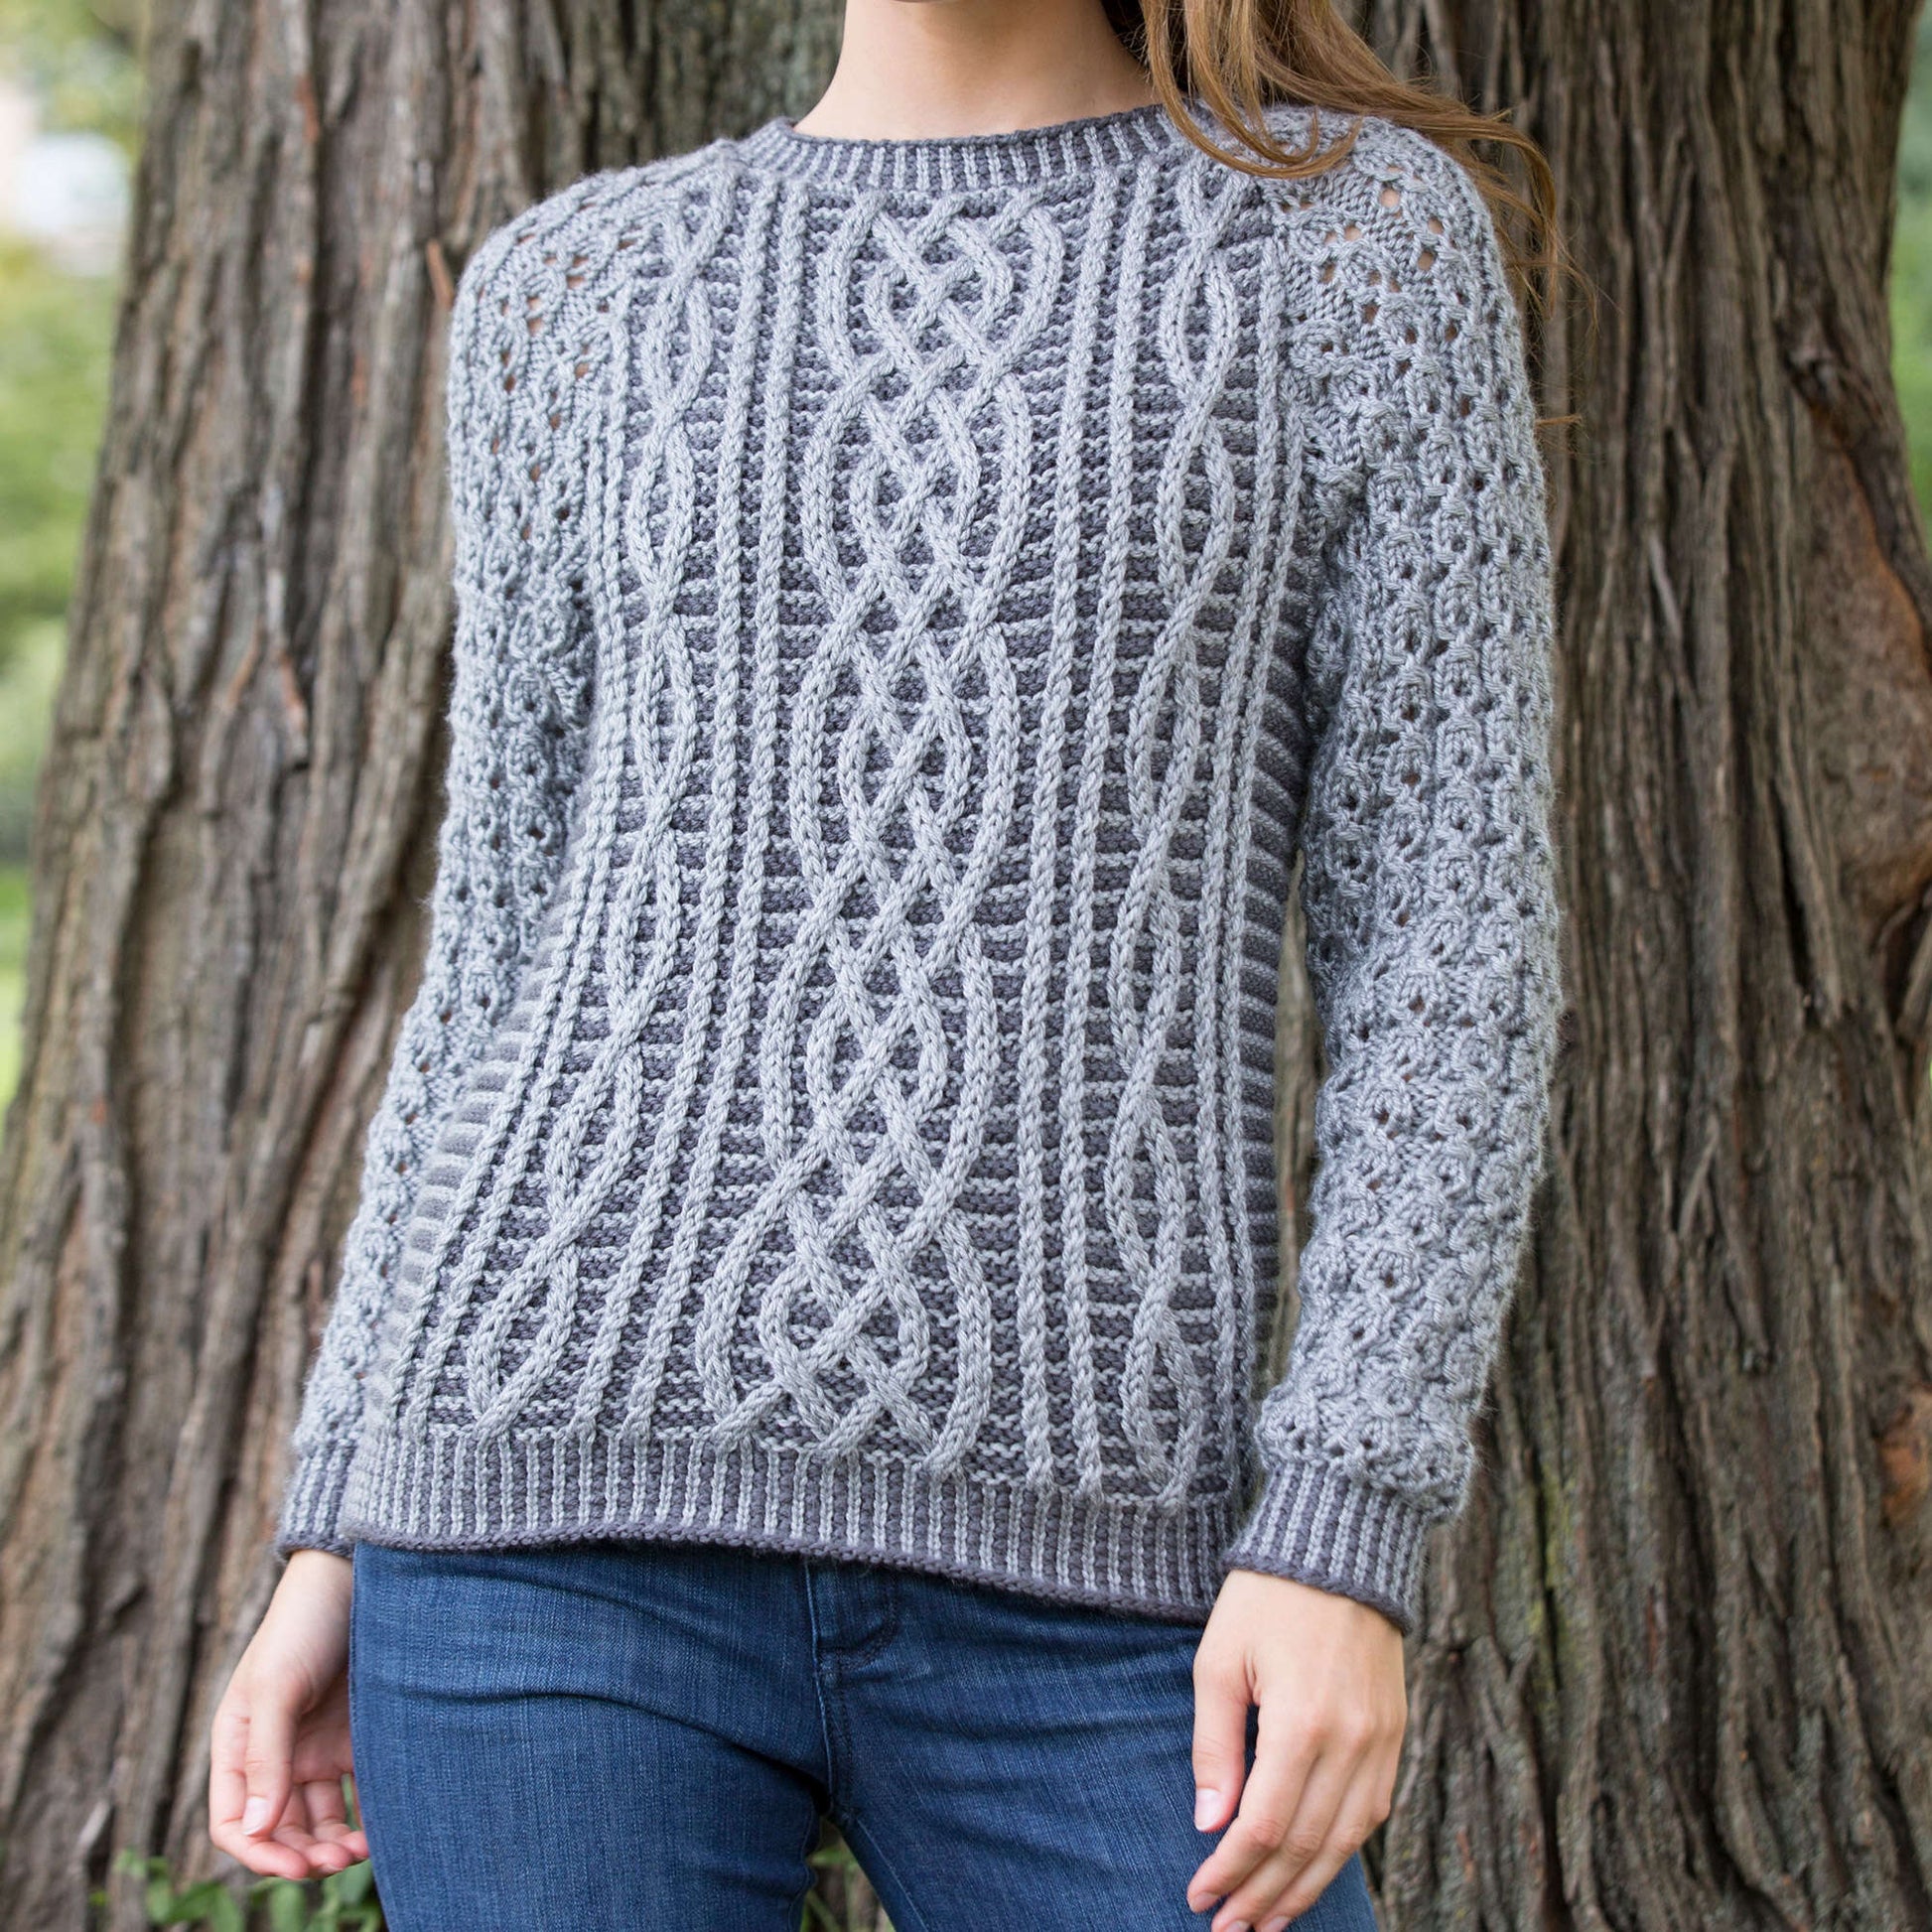 Free Red Heart Two-Tone Cable Sweater Knit Pattern